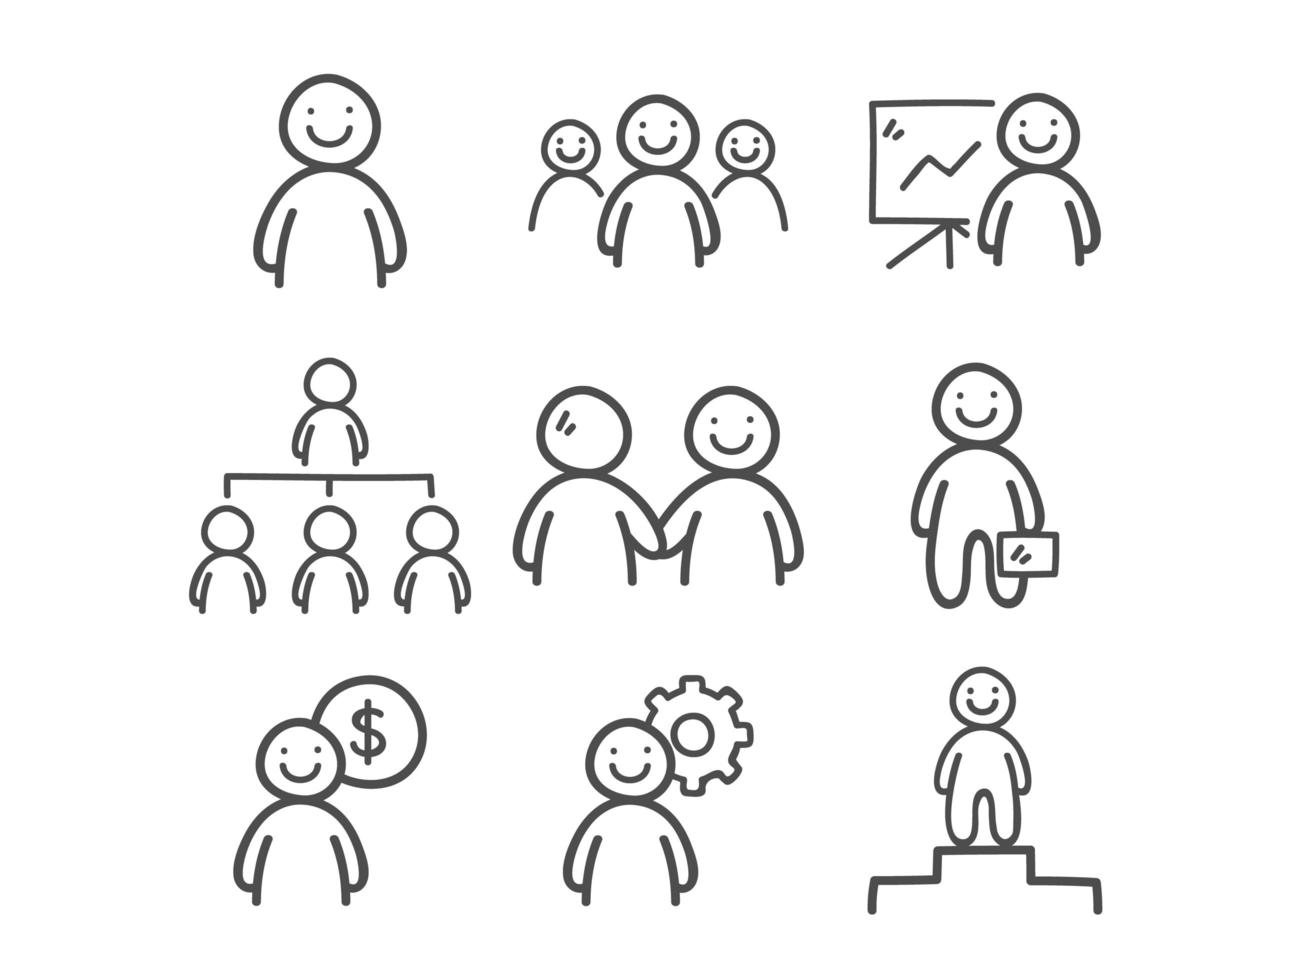 Doodle Business People Icons Set vector